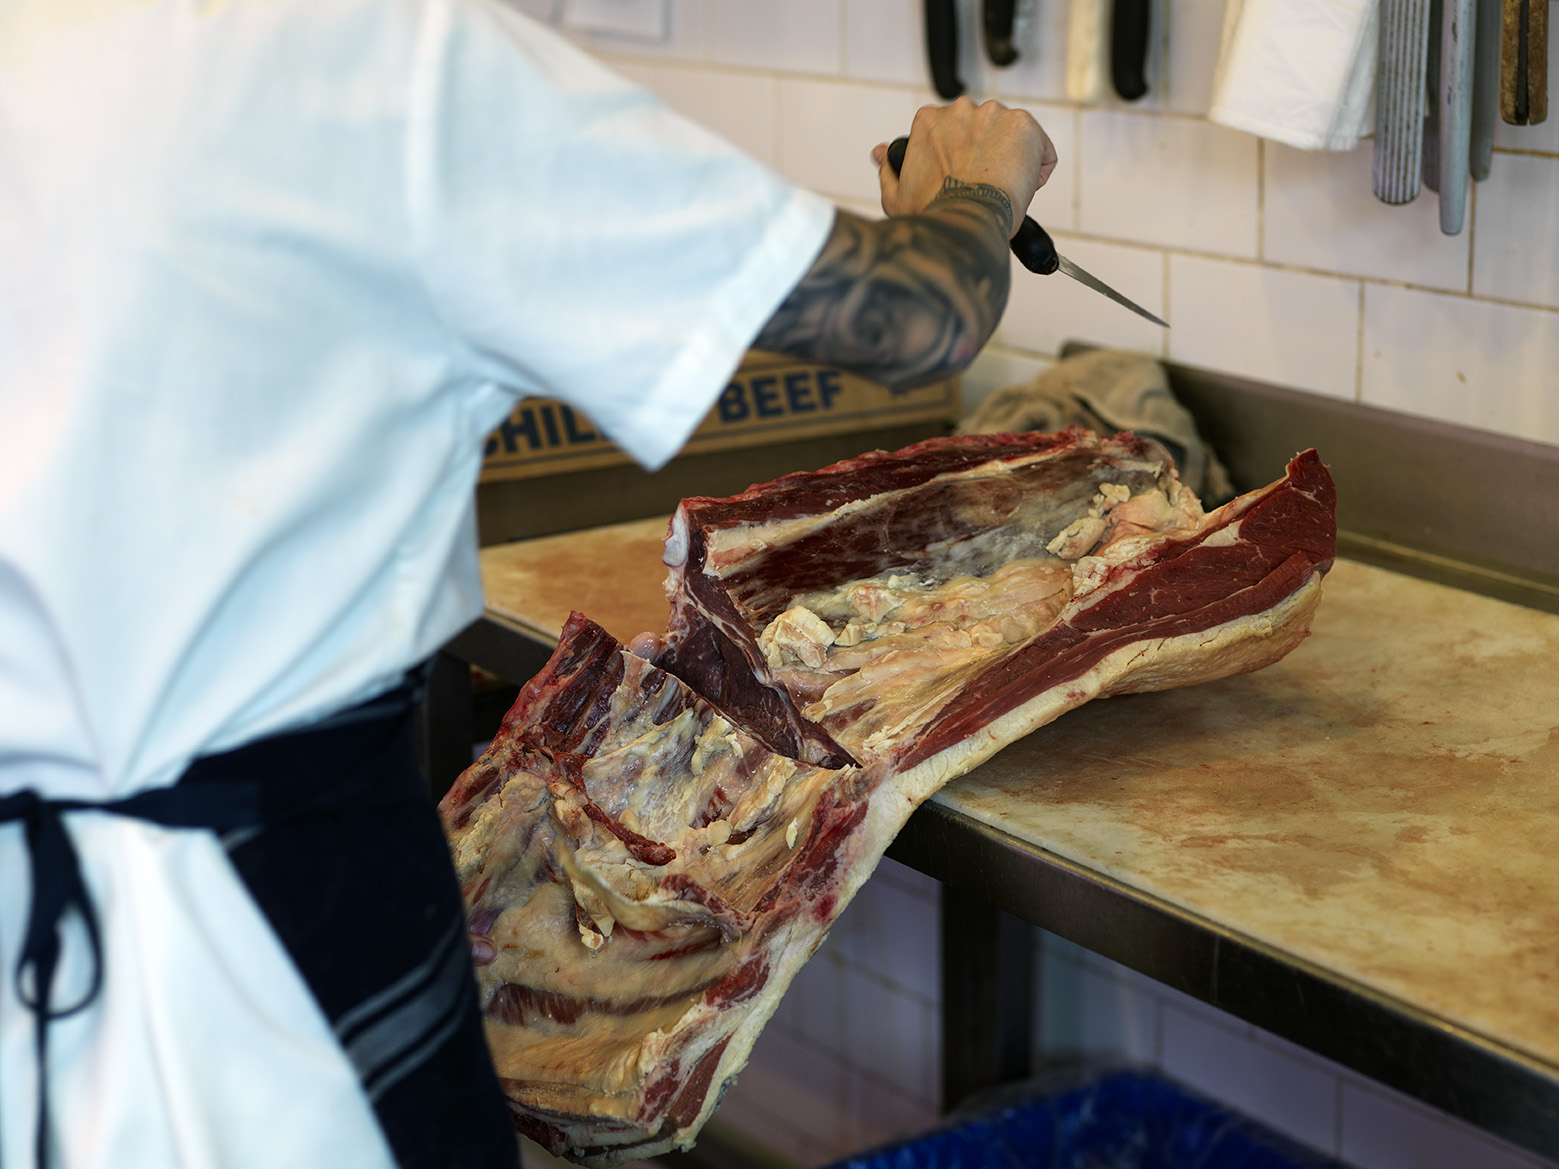 Knife skills from cheffing were a natural fit for butchery.